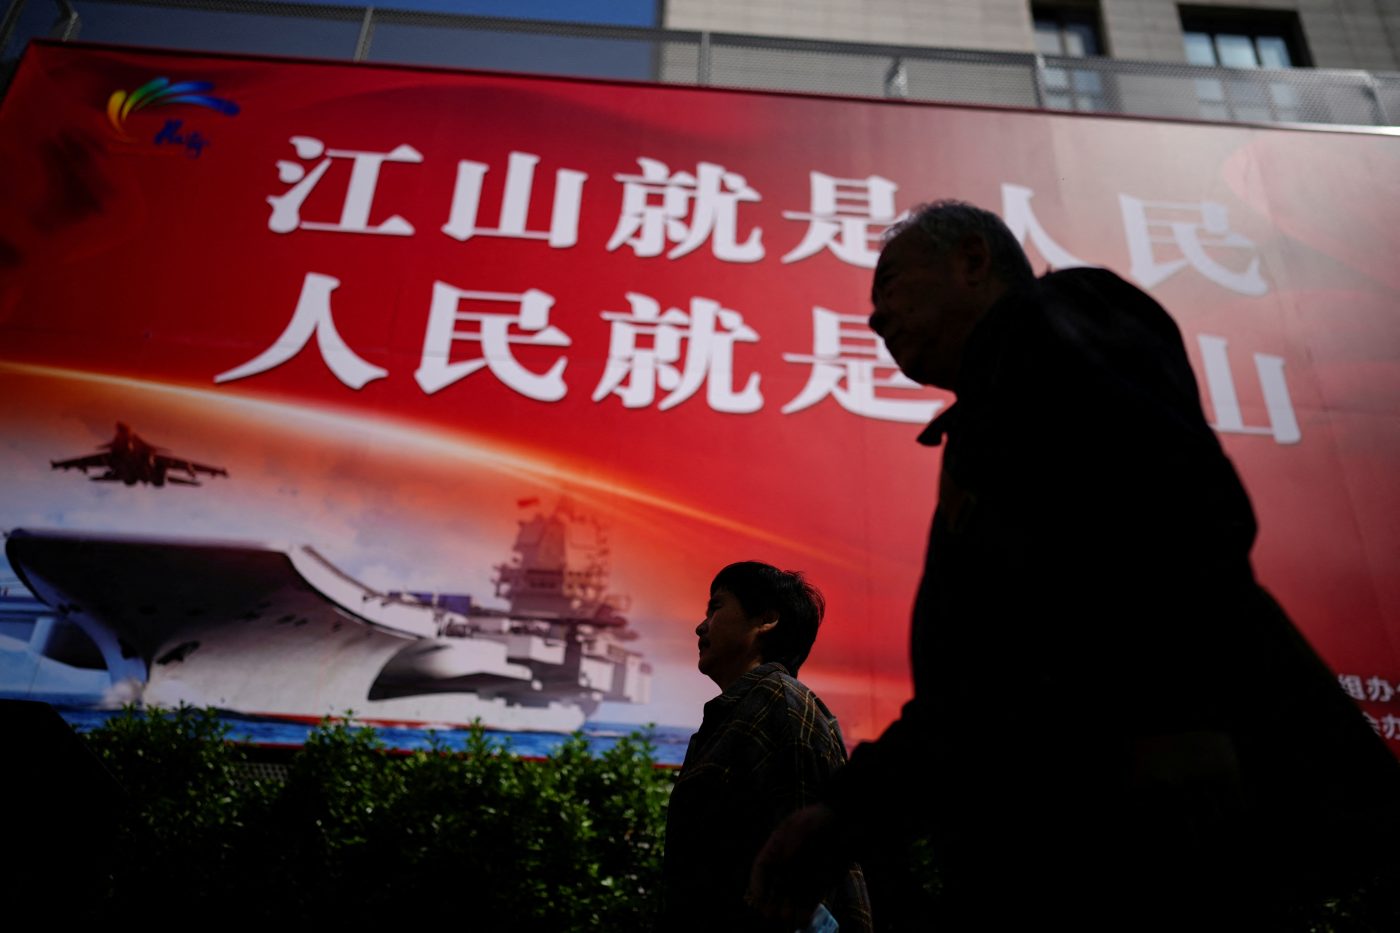 Photo: People walk on a street in front of a large propaganda poster in Shanghai, China, April 10, 2023. Credit: REUTERS/Aly Song